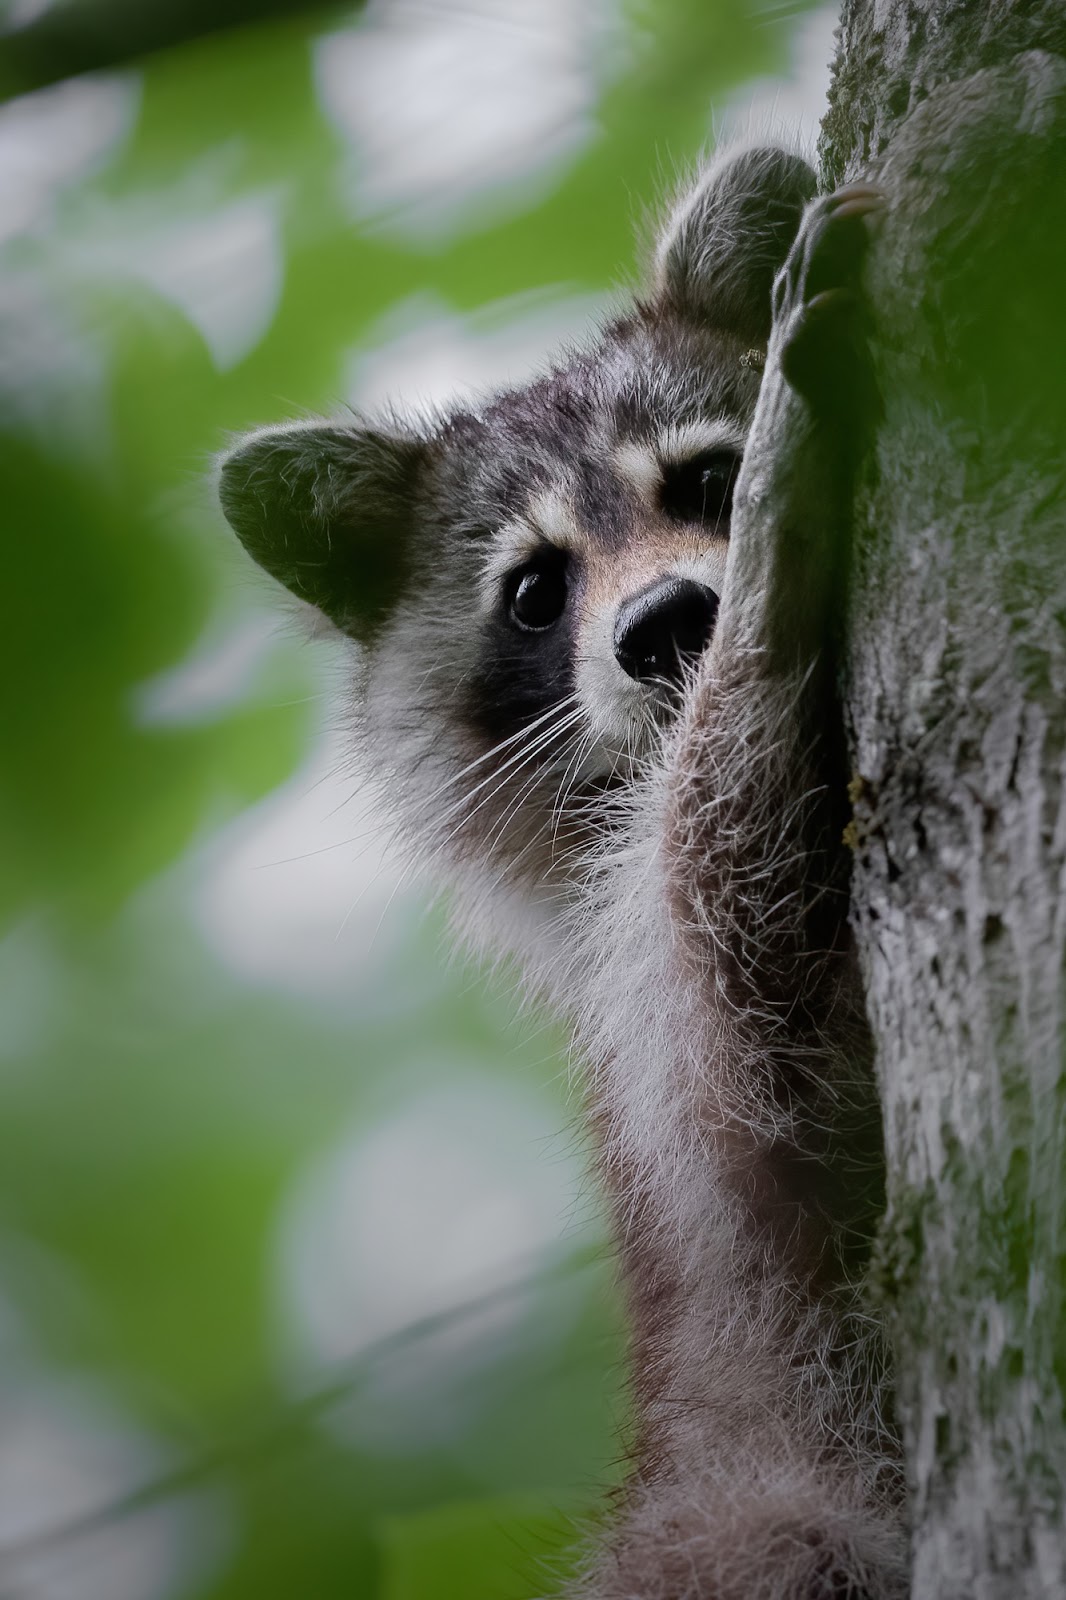 a raccoon clings to a tree trunk and stares at the camera through blurred green foliage